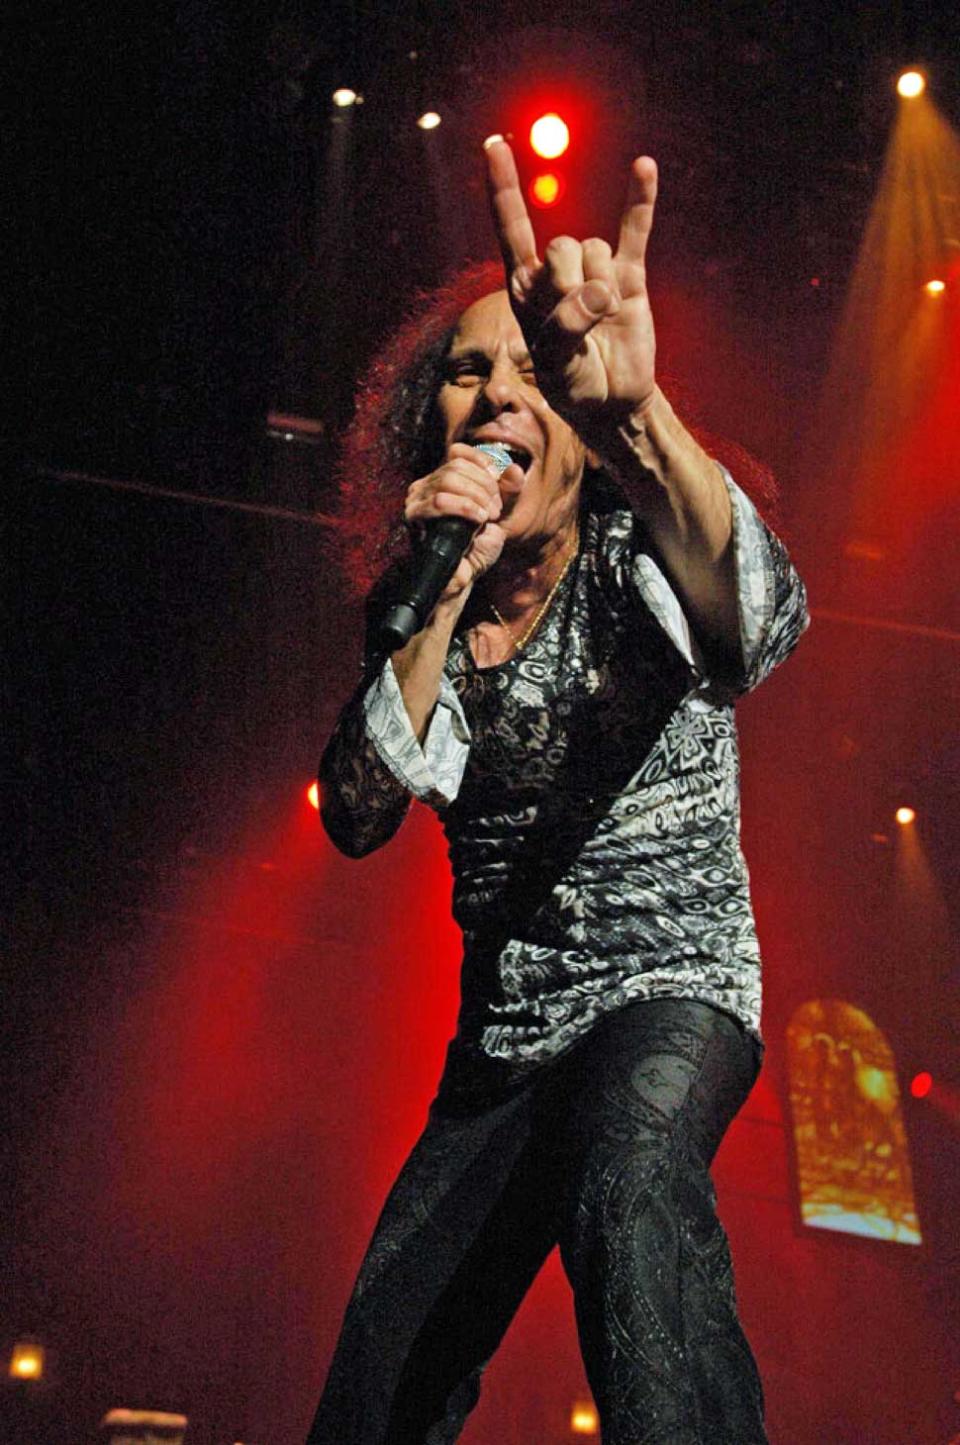 Ronie James Dio onstage throwing the horns